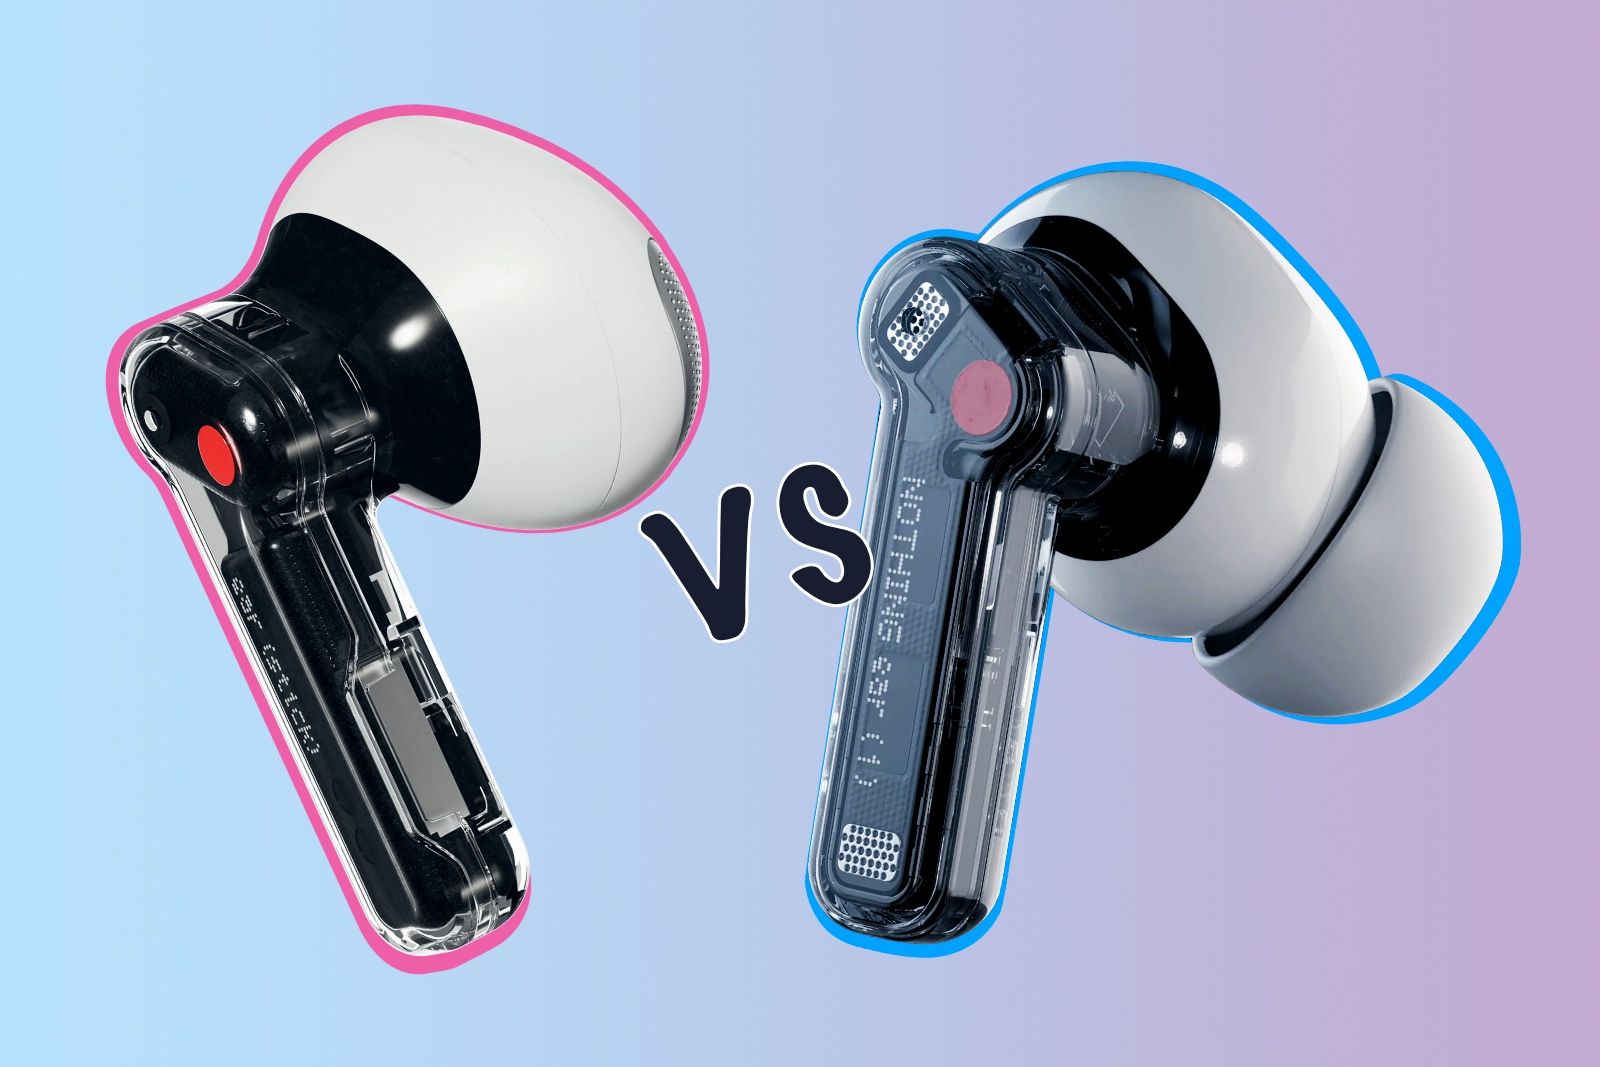 Nothing Ear (stick) vs Nothing Ear (1): What's the difference?